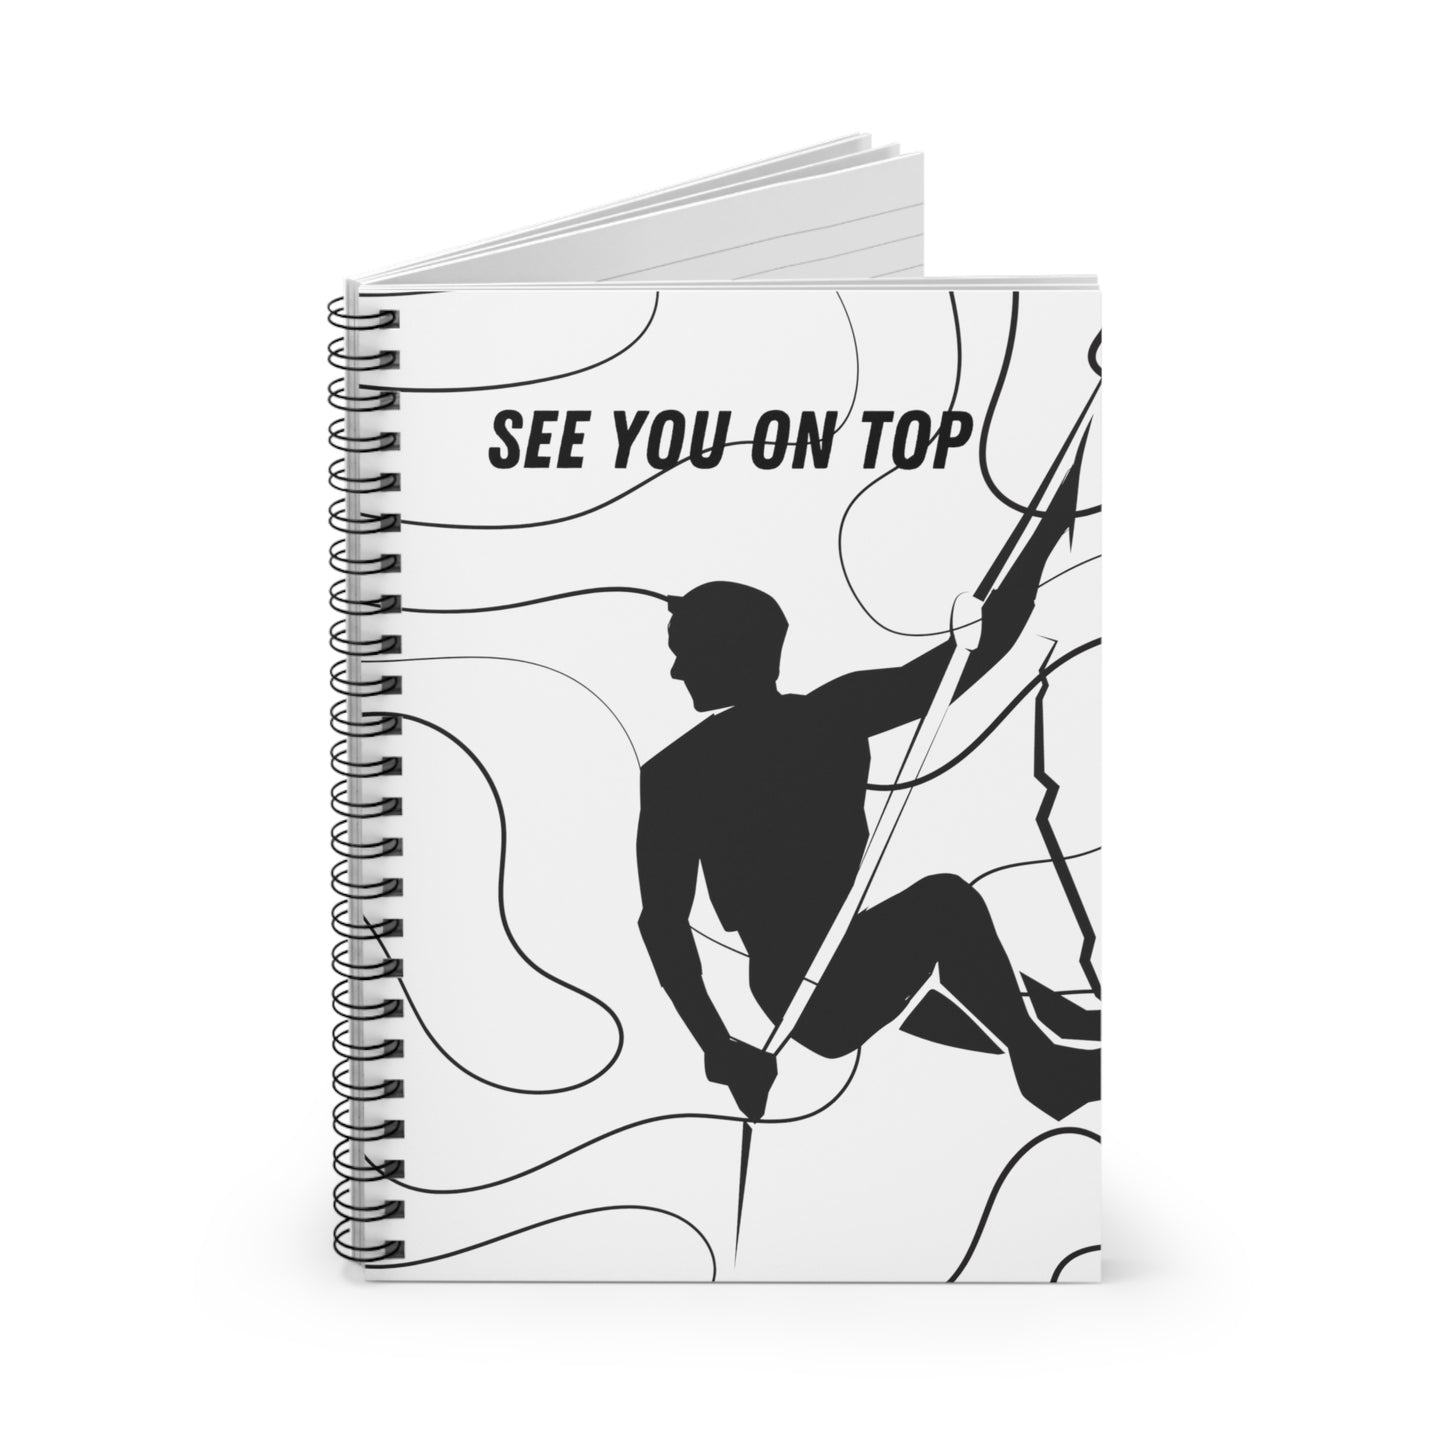 See You on Top: Spiral Notebook - Log Books - Journals - Diaries - and More Custom Printed by TheGlassyLass.com